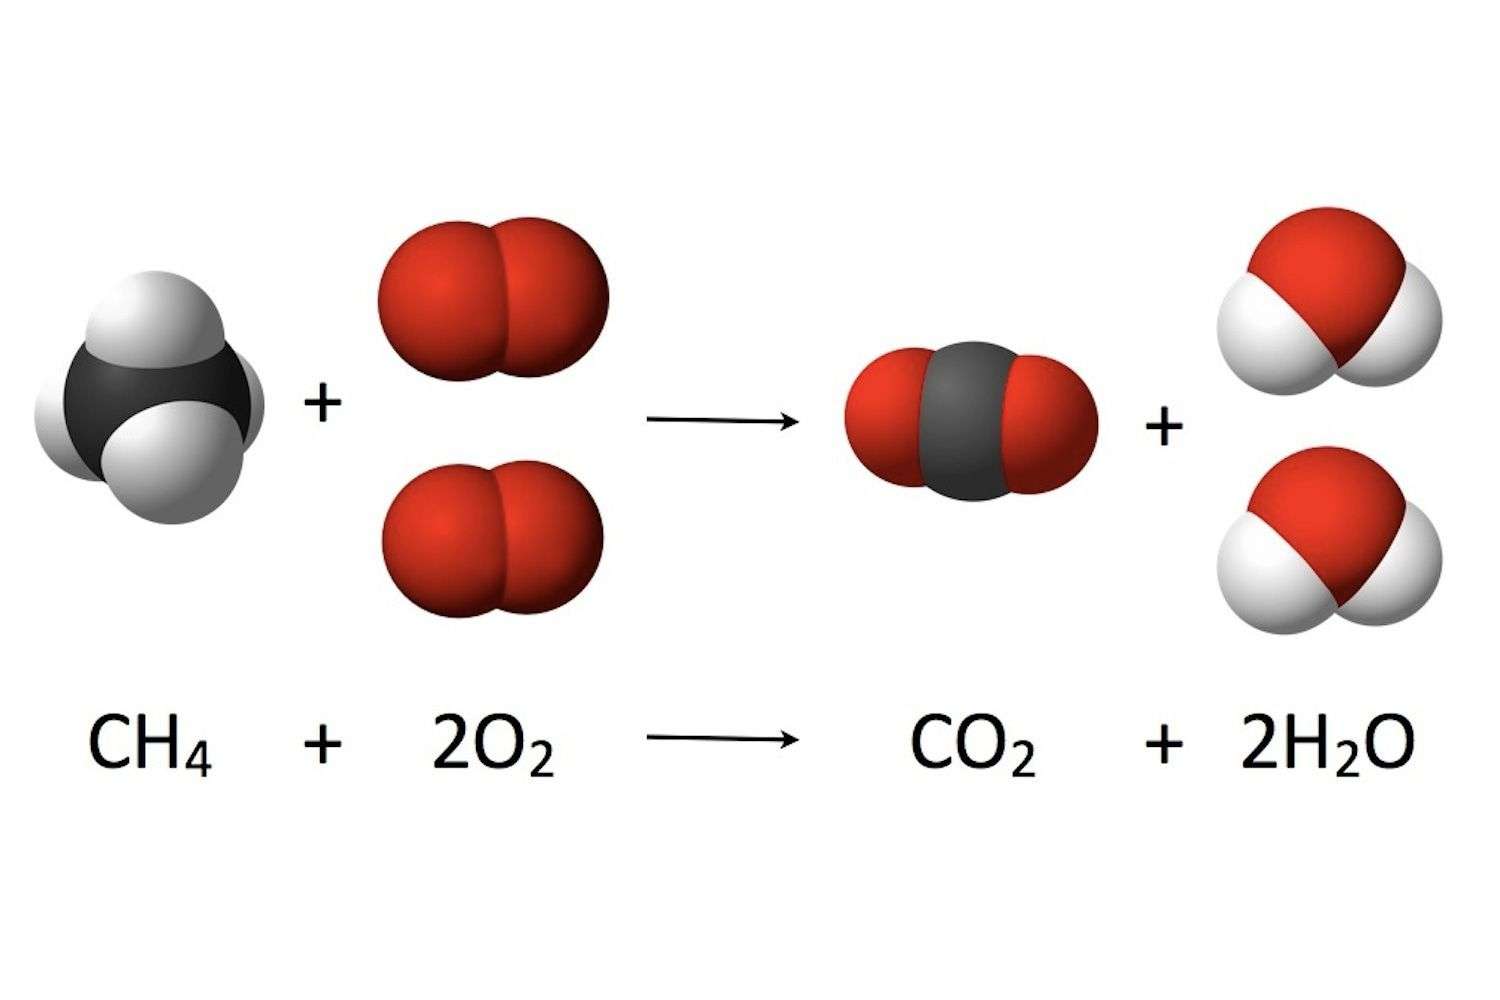 An Introduction to Combustion (Burning) Reactions